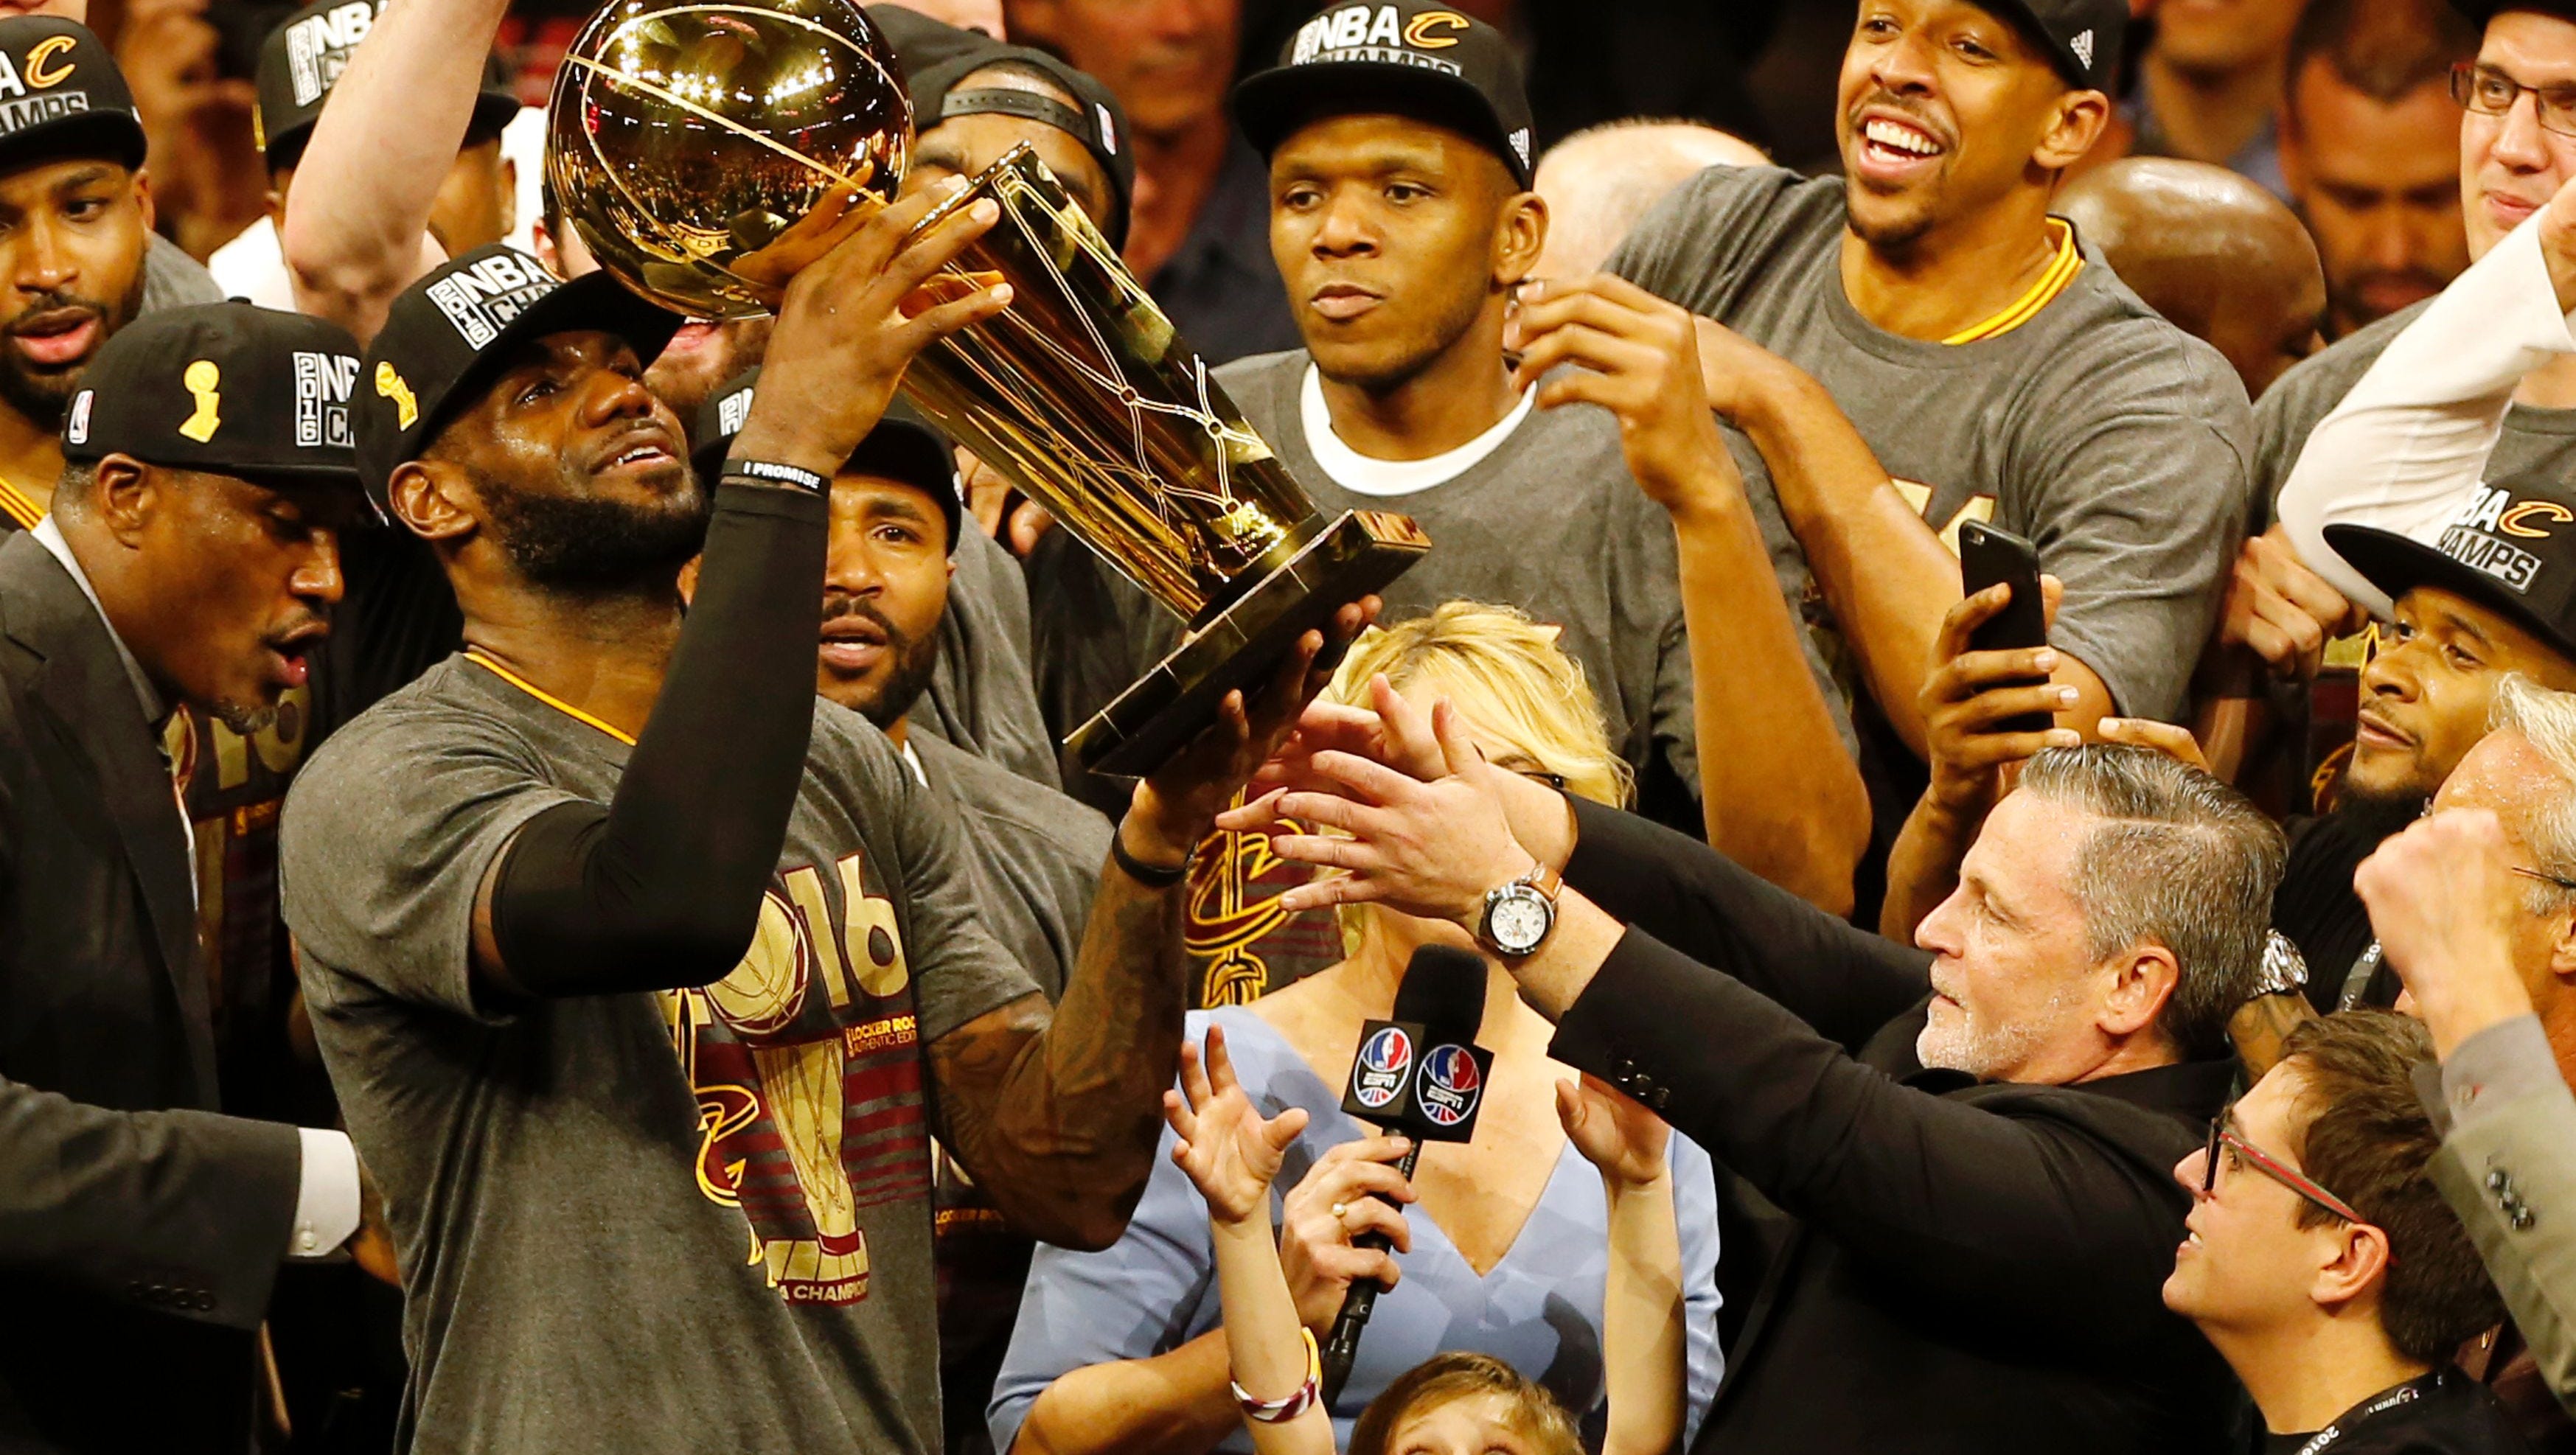 Cavaliers forward LeBron James, left, hoists the Larry O'Brien trophy with owner Dan Gilbert, right, after defeating the Golden State Warriors to win the NBA title in Oakland, California.